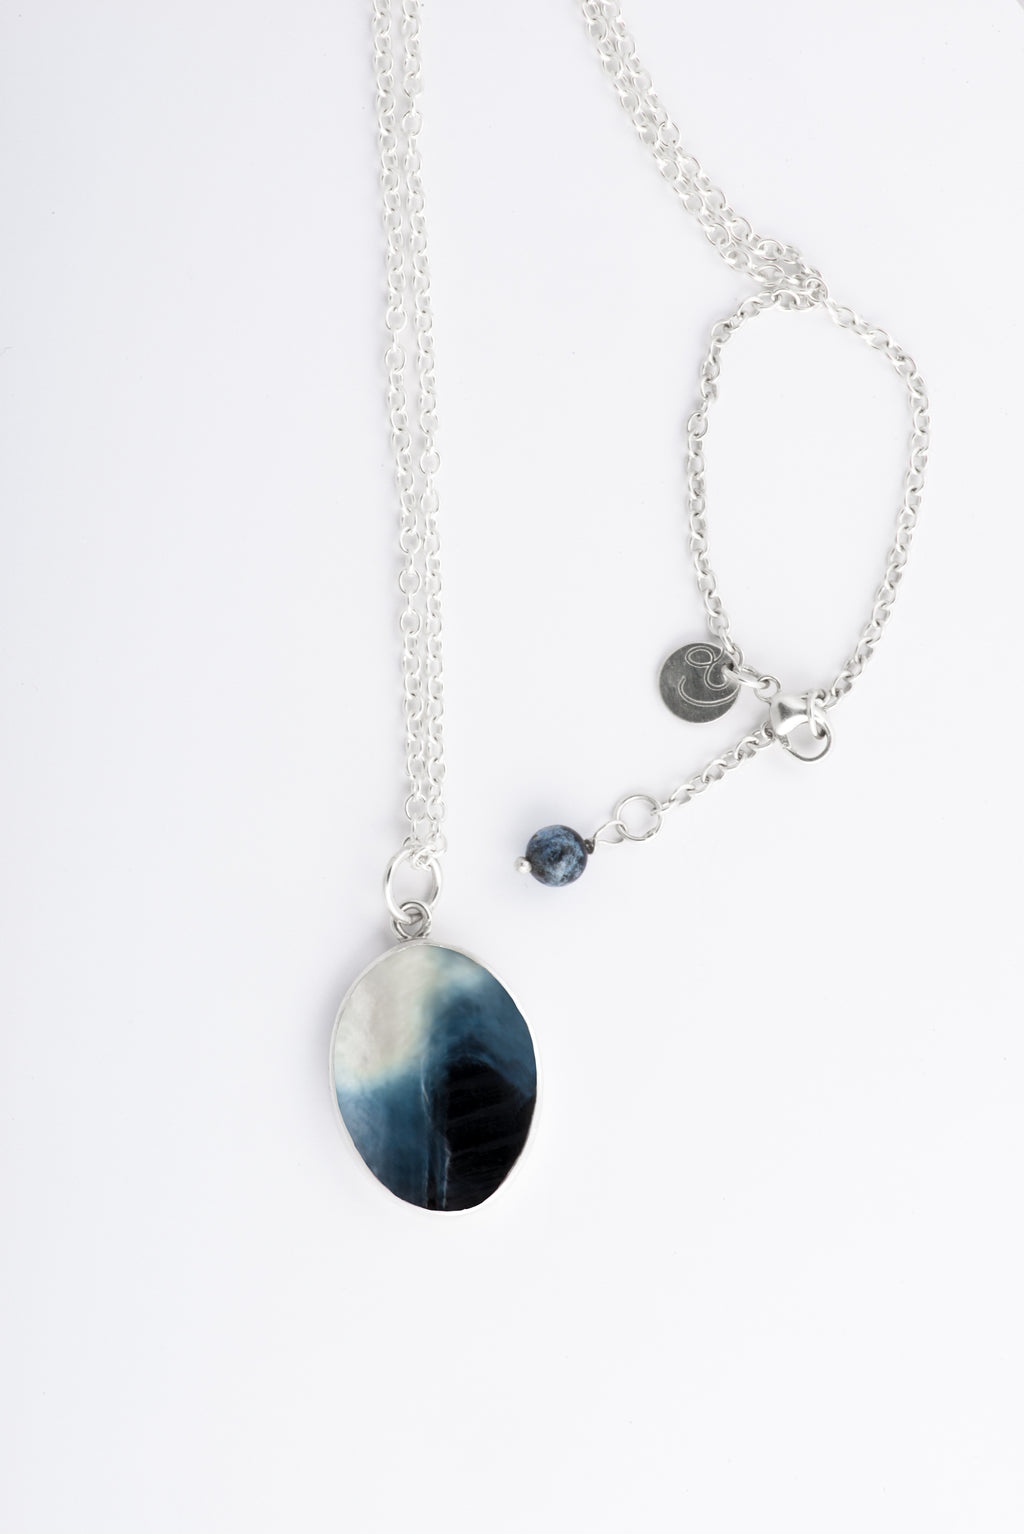 SHELL necklace by Anette Skaugen Guldager - Norwegian Jewelry from Telemark, Norway.